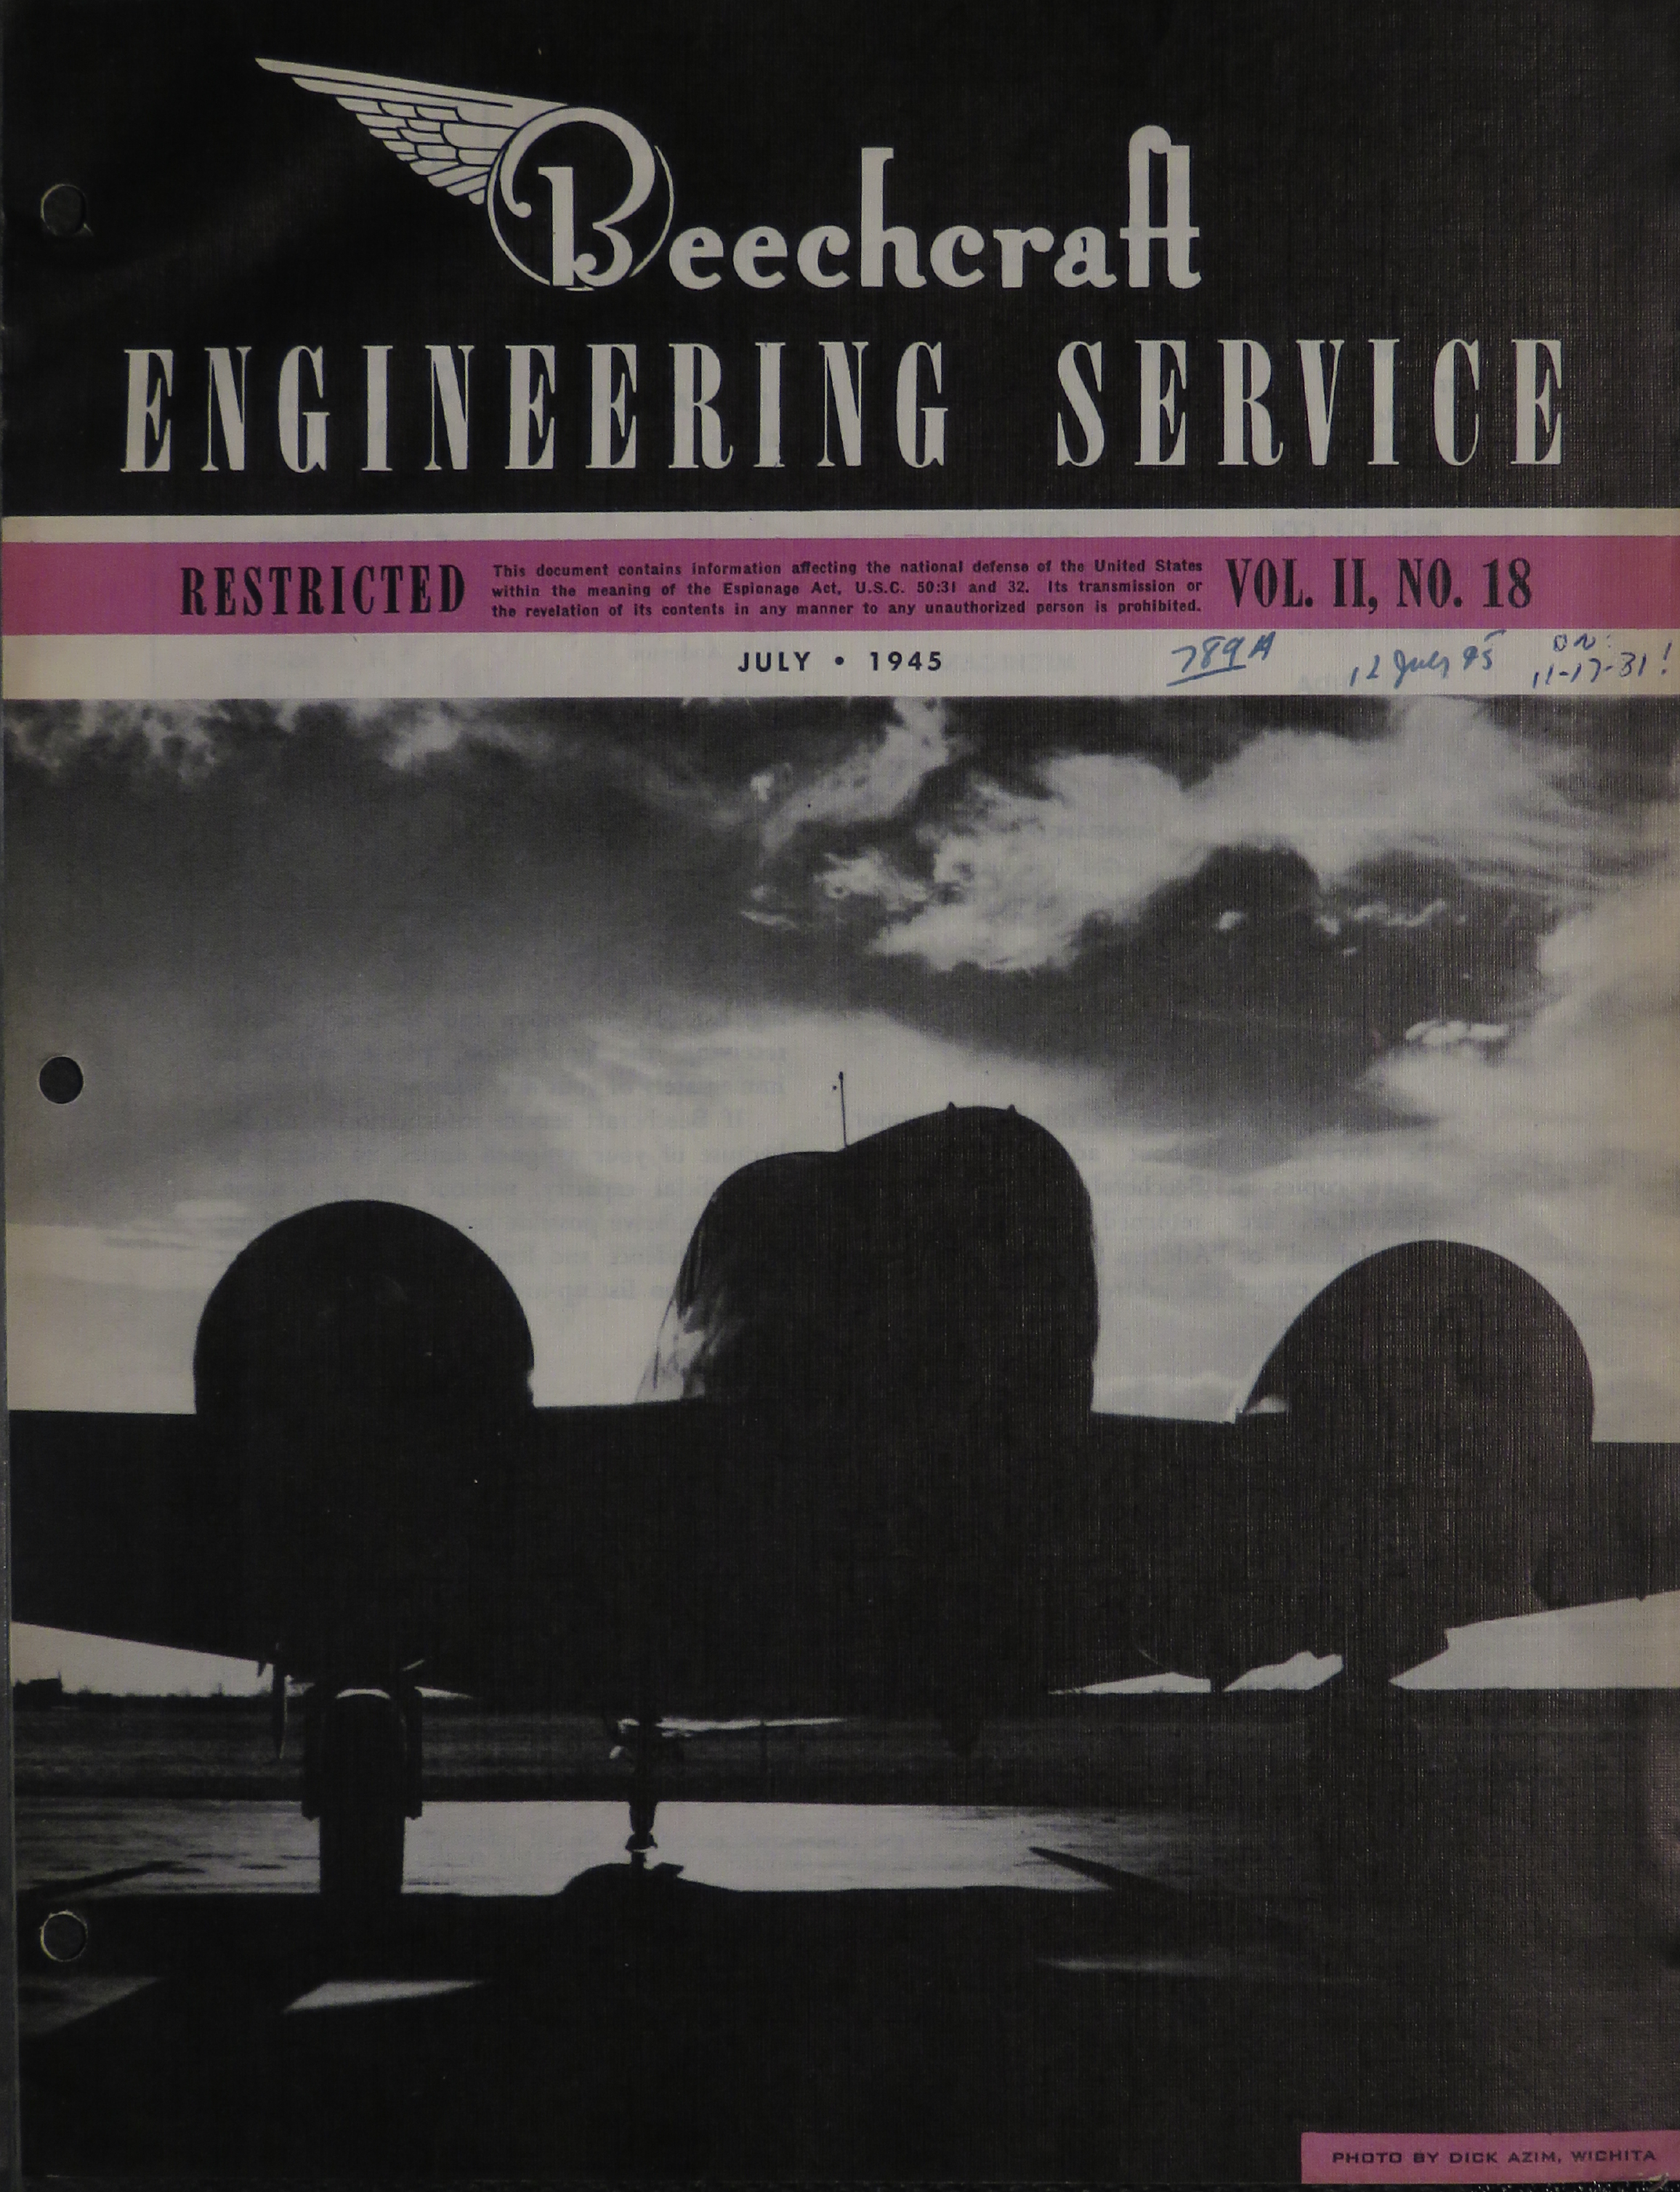 Sample page 1 from AirCorps Library document: Vol. II, No. 18 - Beechcraft Engineering Service